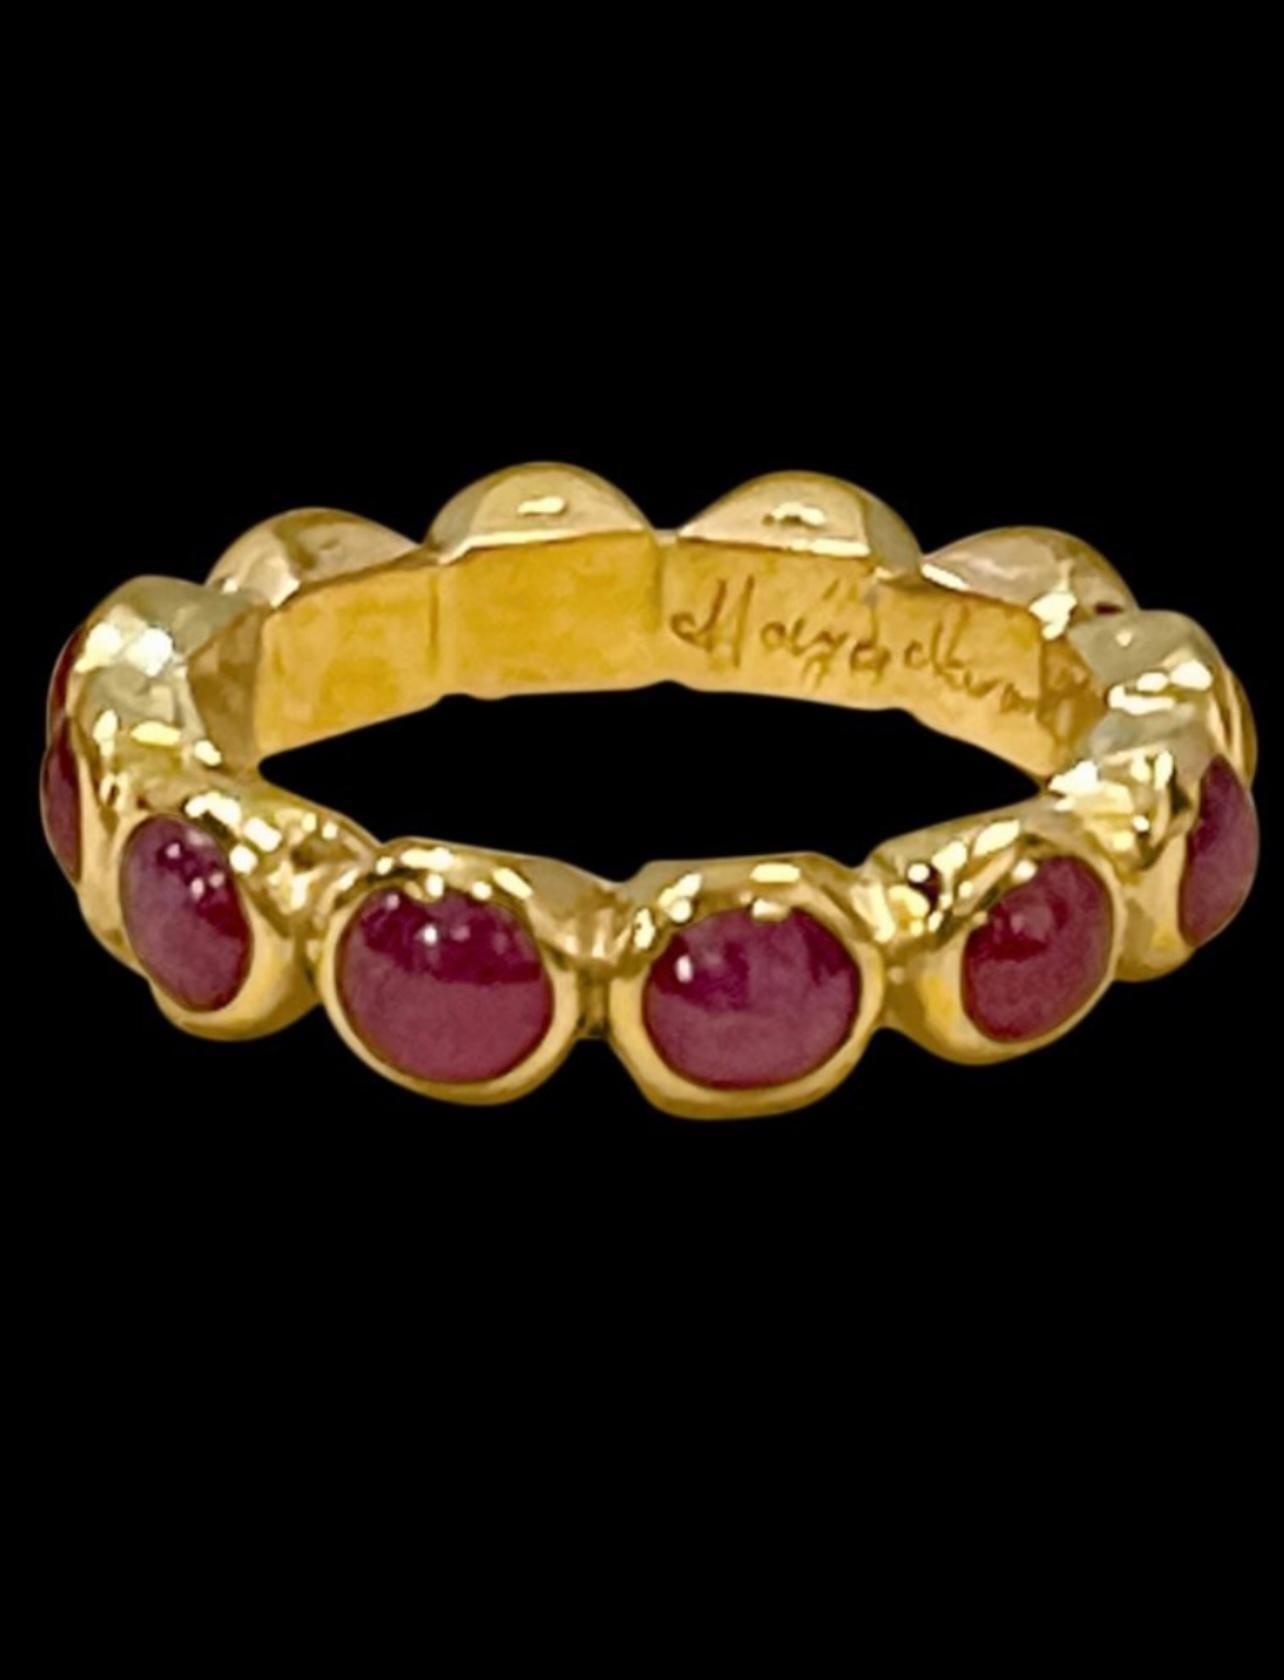 
20 Pointer Each 3Ct  Natural Ruby Cabochon Anniversary Eternity Band/Ring 18KYG
Full Bezel set Natural Ruby cabochon   eternity ring set all around with matching 100% natural Ruby   solid Yellow Gold 
5 mm Wide band , Thickness 3.5  mm
This